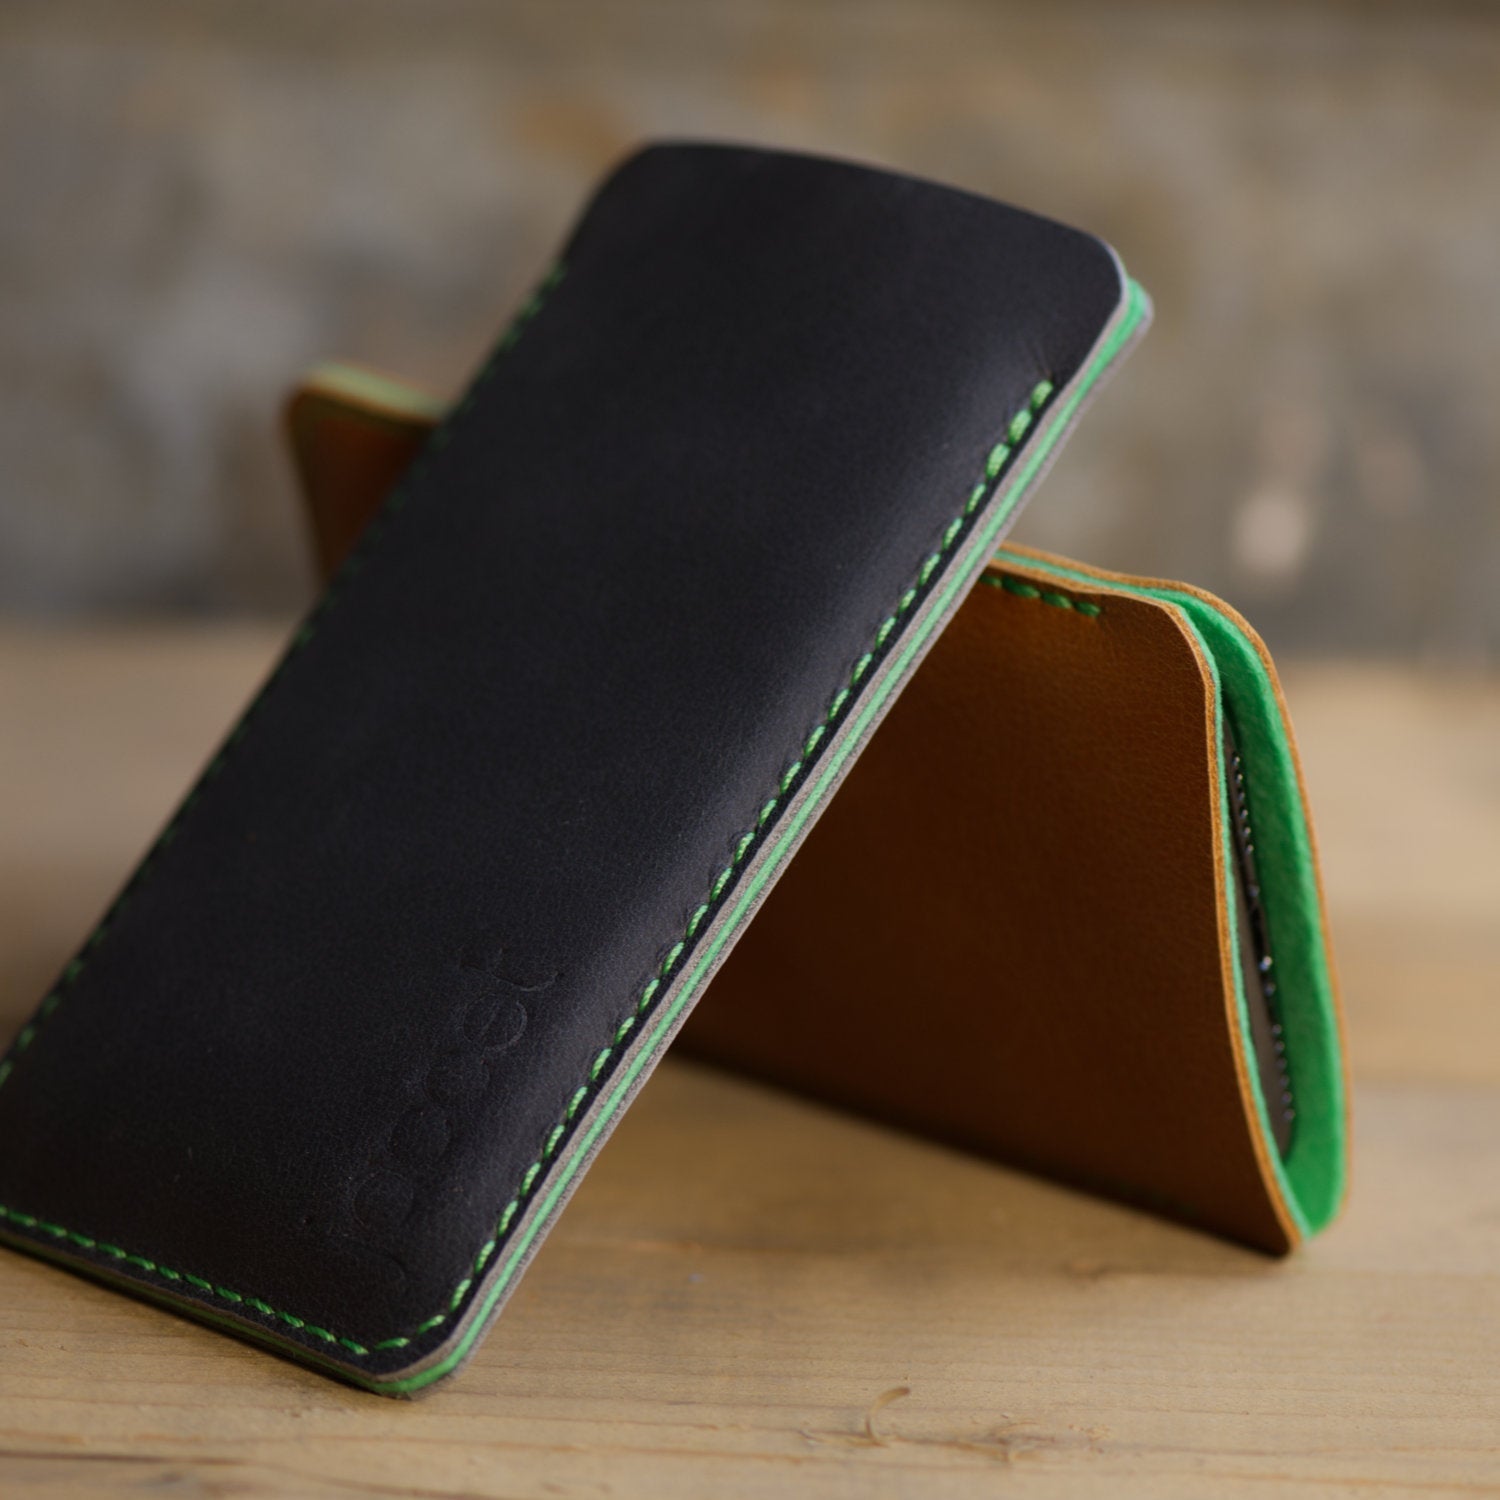 JACCET leather Samsung Galaxy sleeve - anthracite/black leather with green wool felt. 100% Handmade